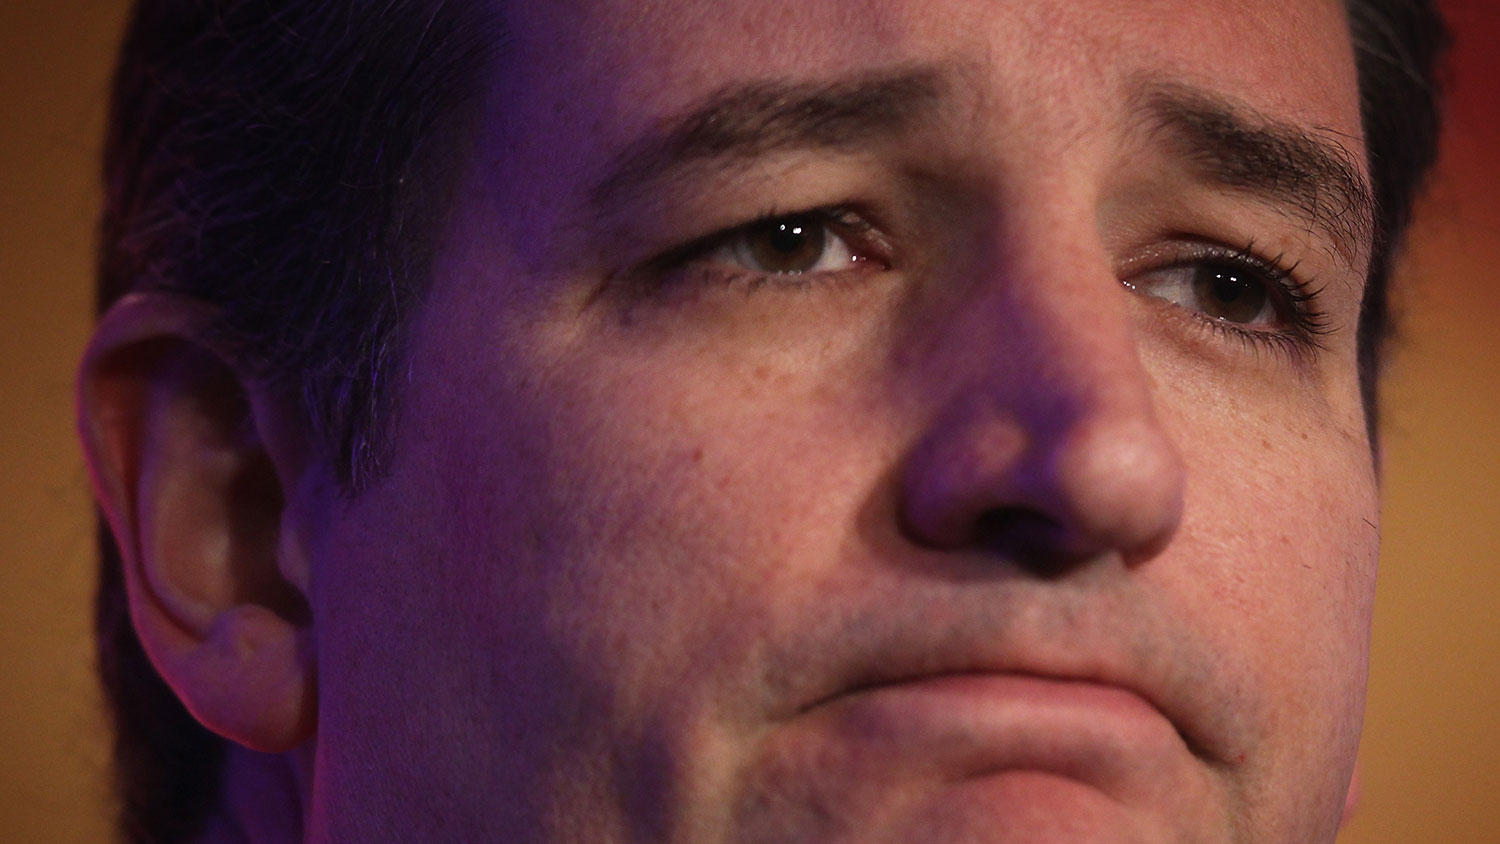 U.S. Sen. Ted Cruz (R-TX) pauses as he speaks during the 2015 Alfred K. Whitehead Legislative Conference and Presidential Forum March 10, 2015 in Washington, DC.
